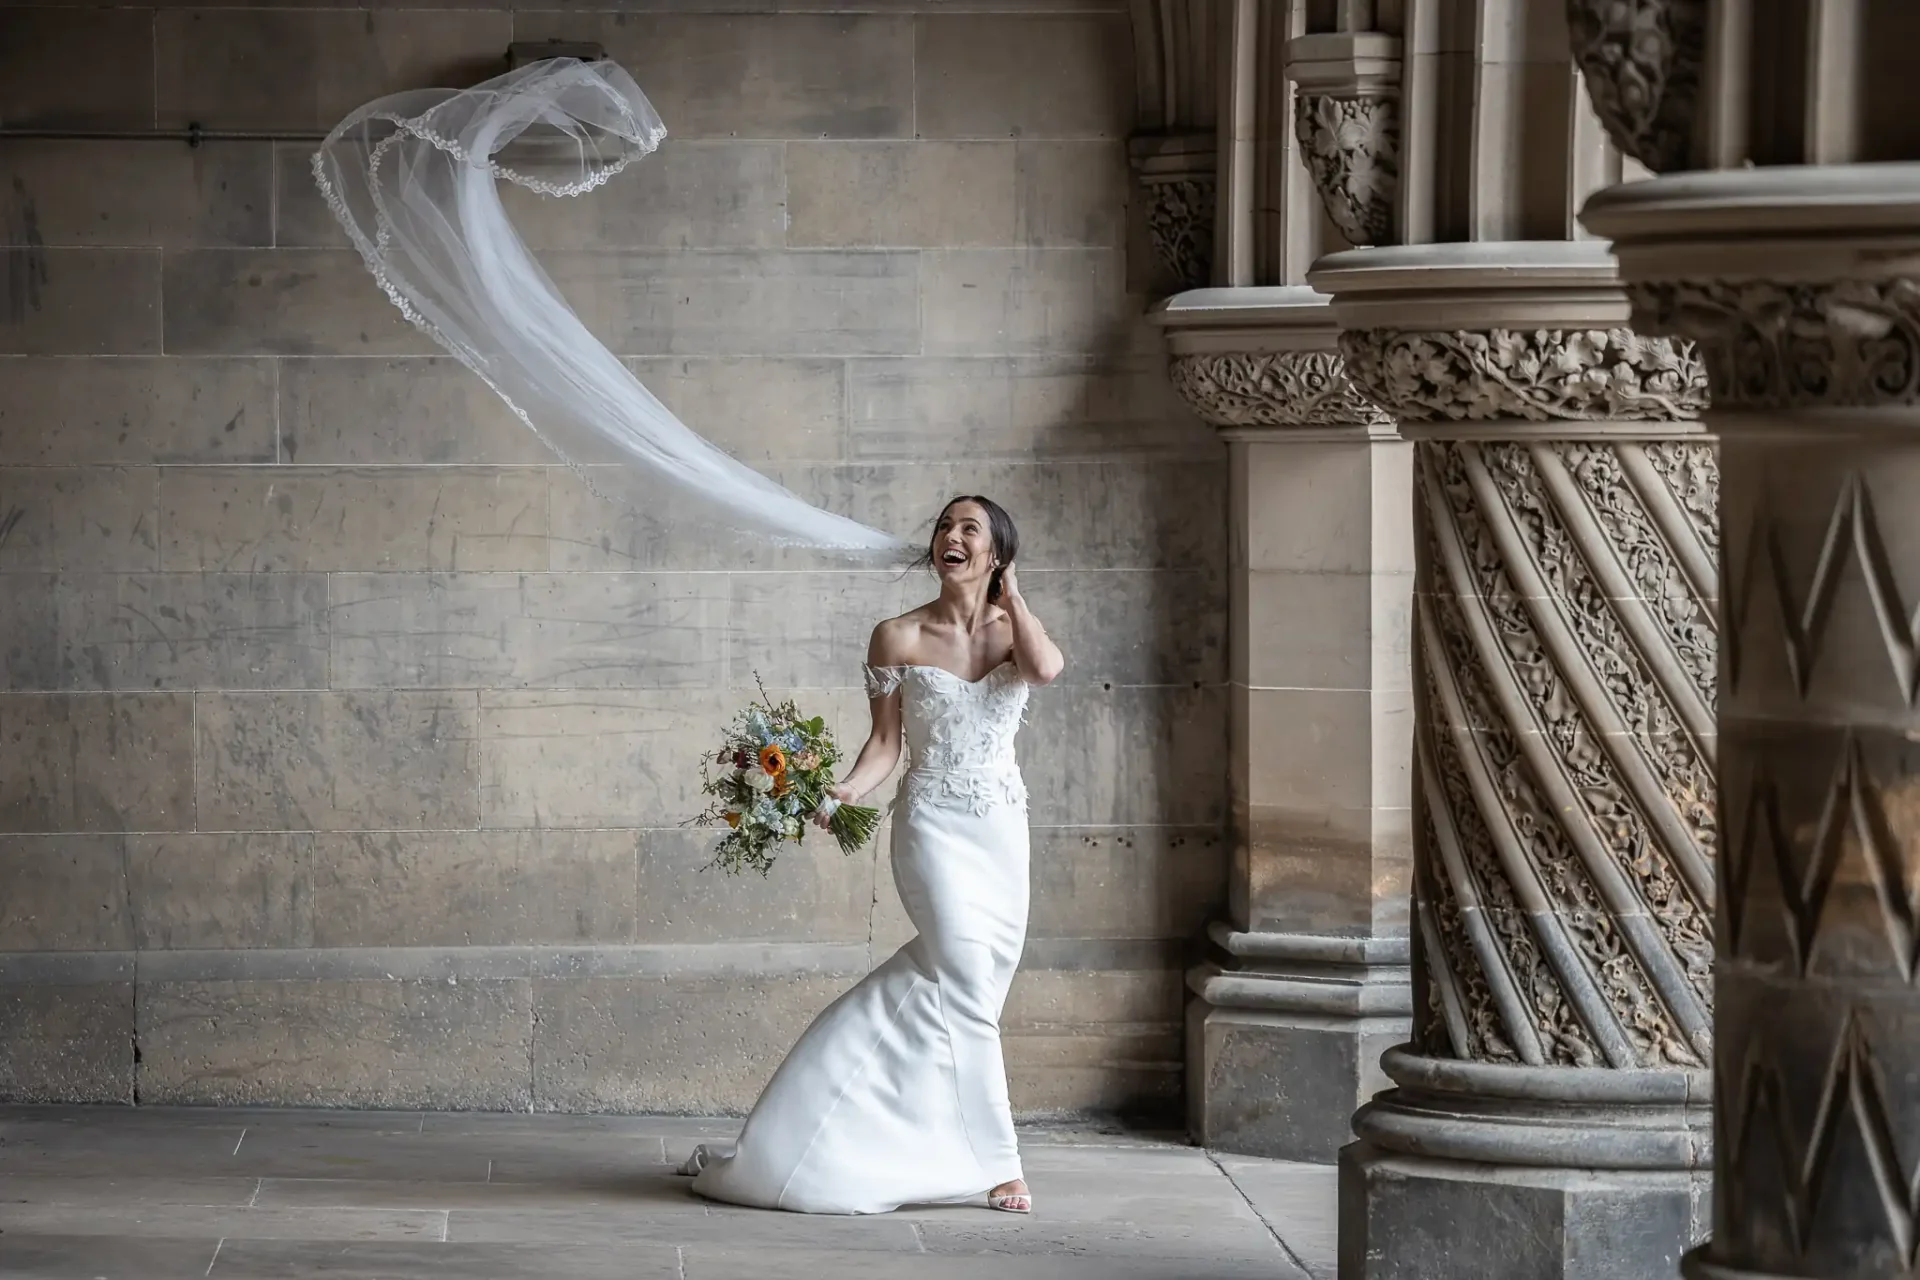 Wedding Photographer Edinburgh:: a bride in a fitted white gown joyfully throws her veil into the air in a grand stone corridor, holding a bouquet of flowers.